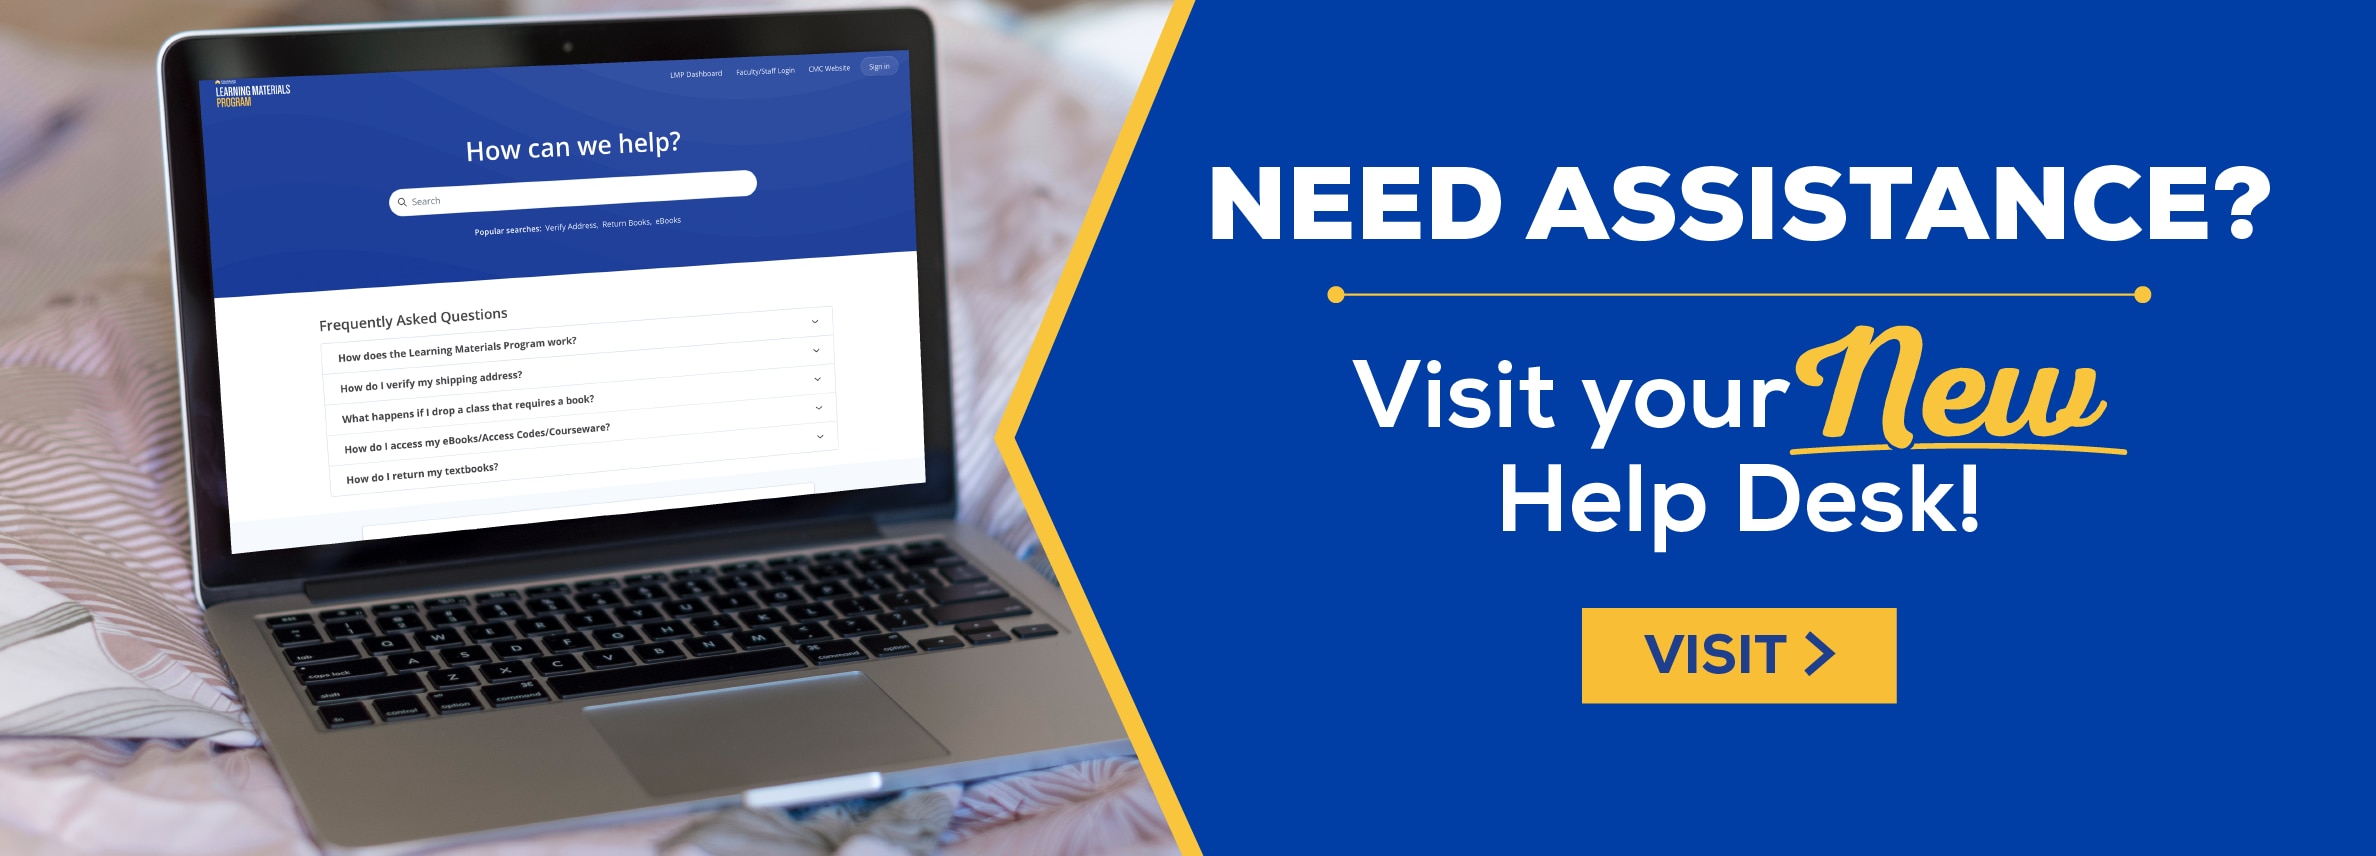 Need assistance? Visit your new help desk! Visit. (new tab)